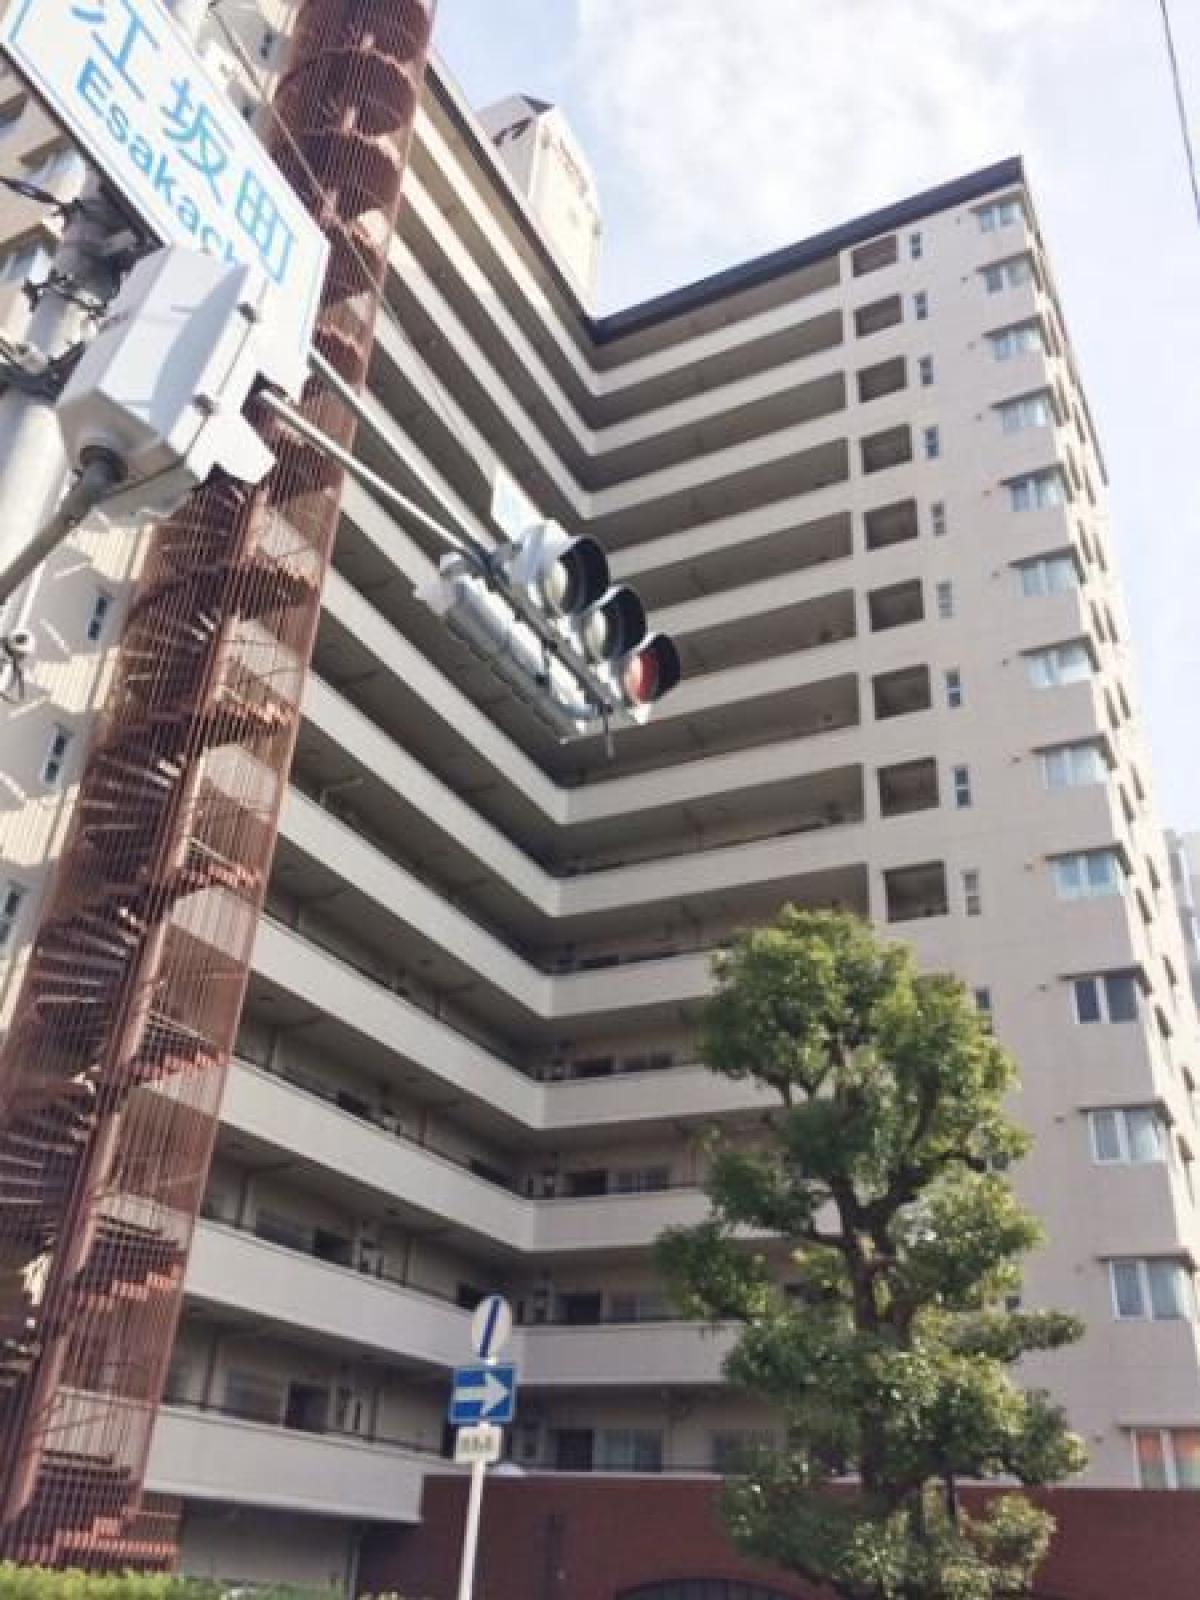 Picture of Apartment For Sale in Suita Shi, Osaka, Japan